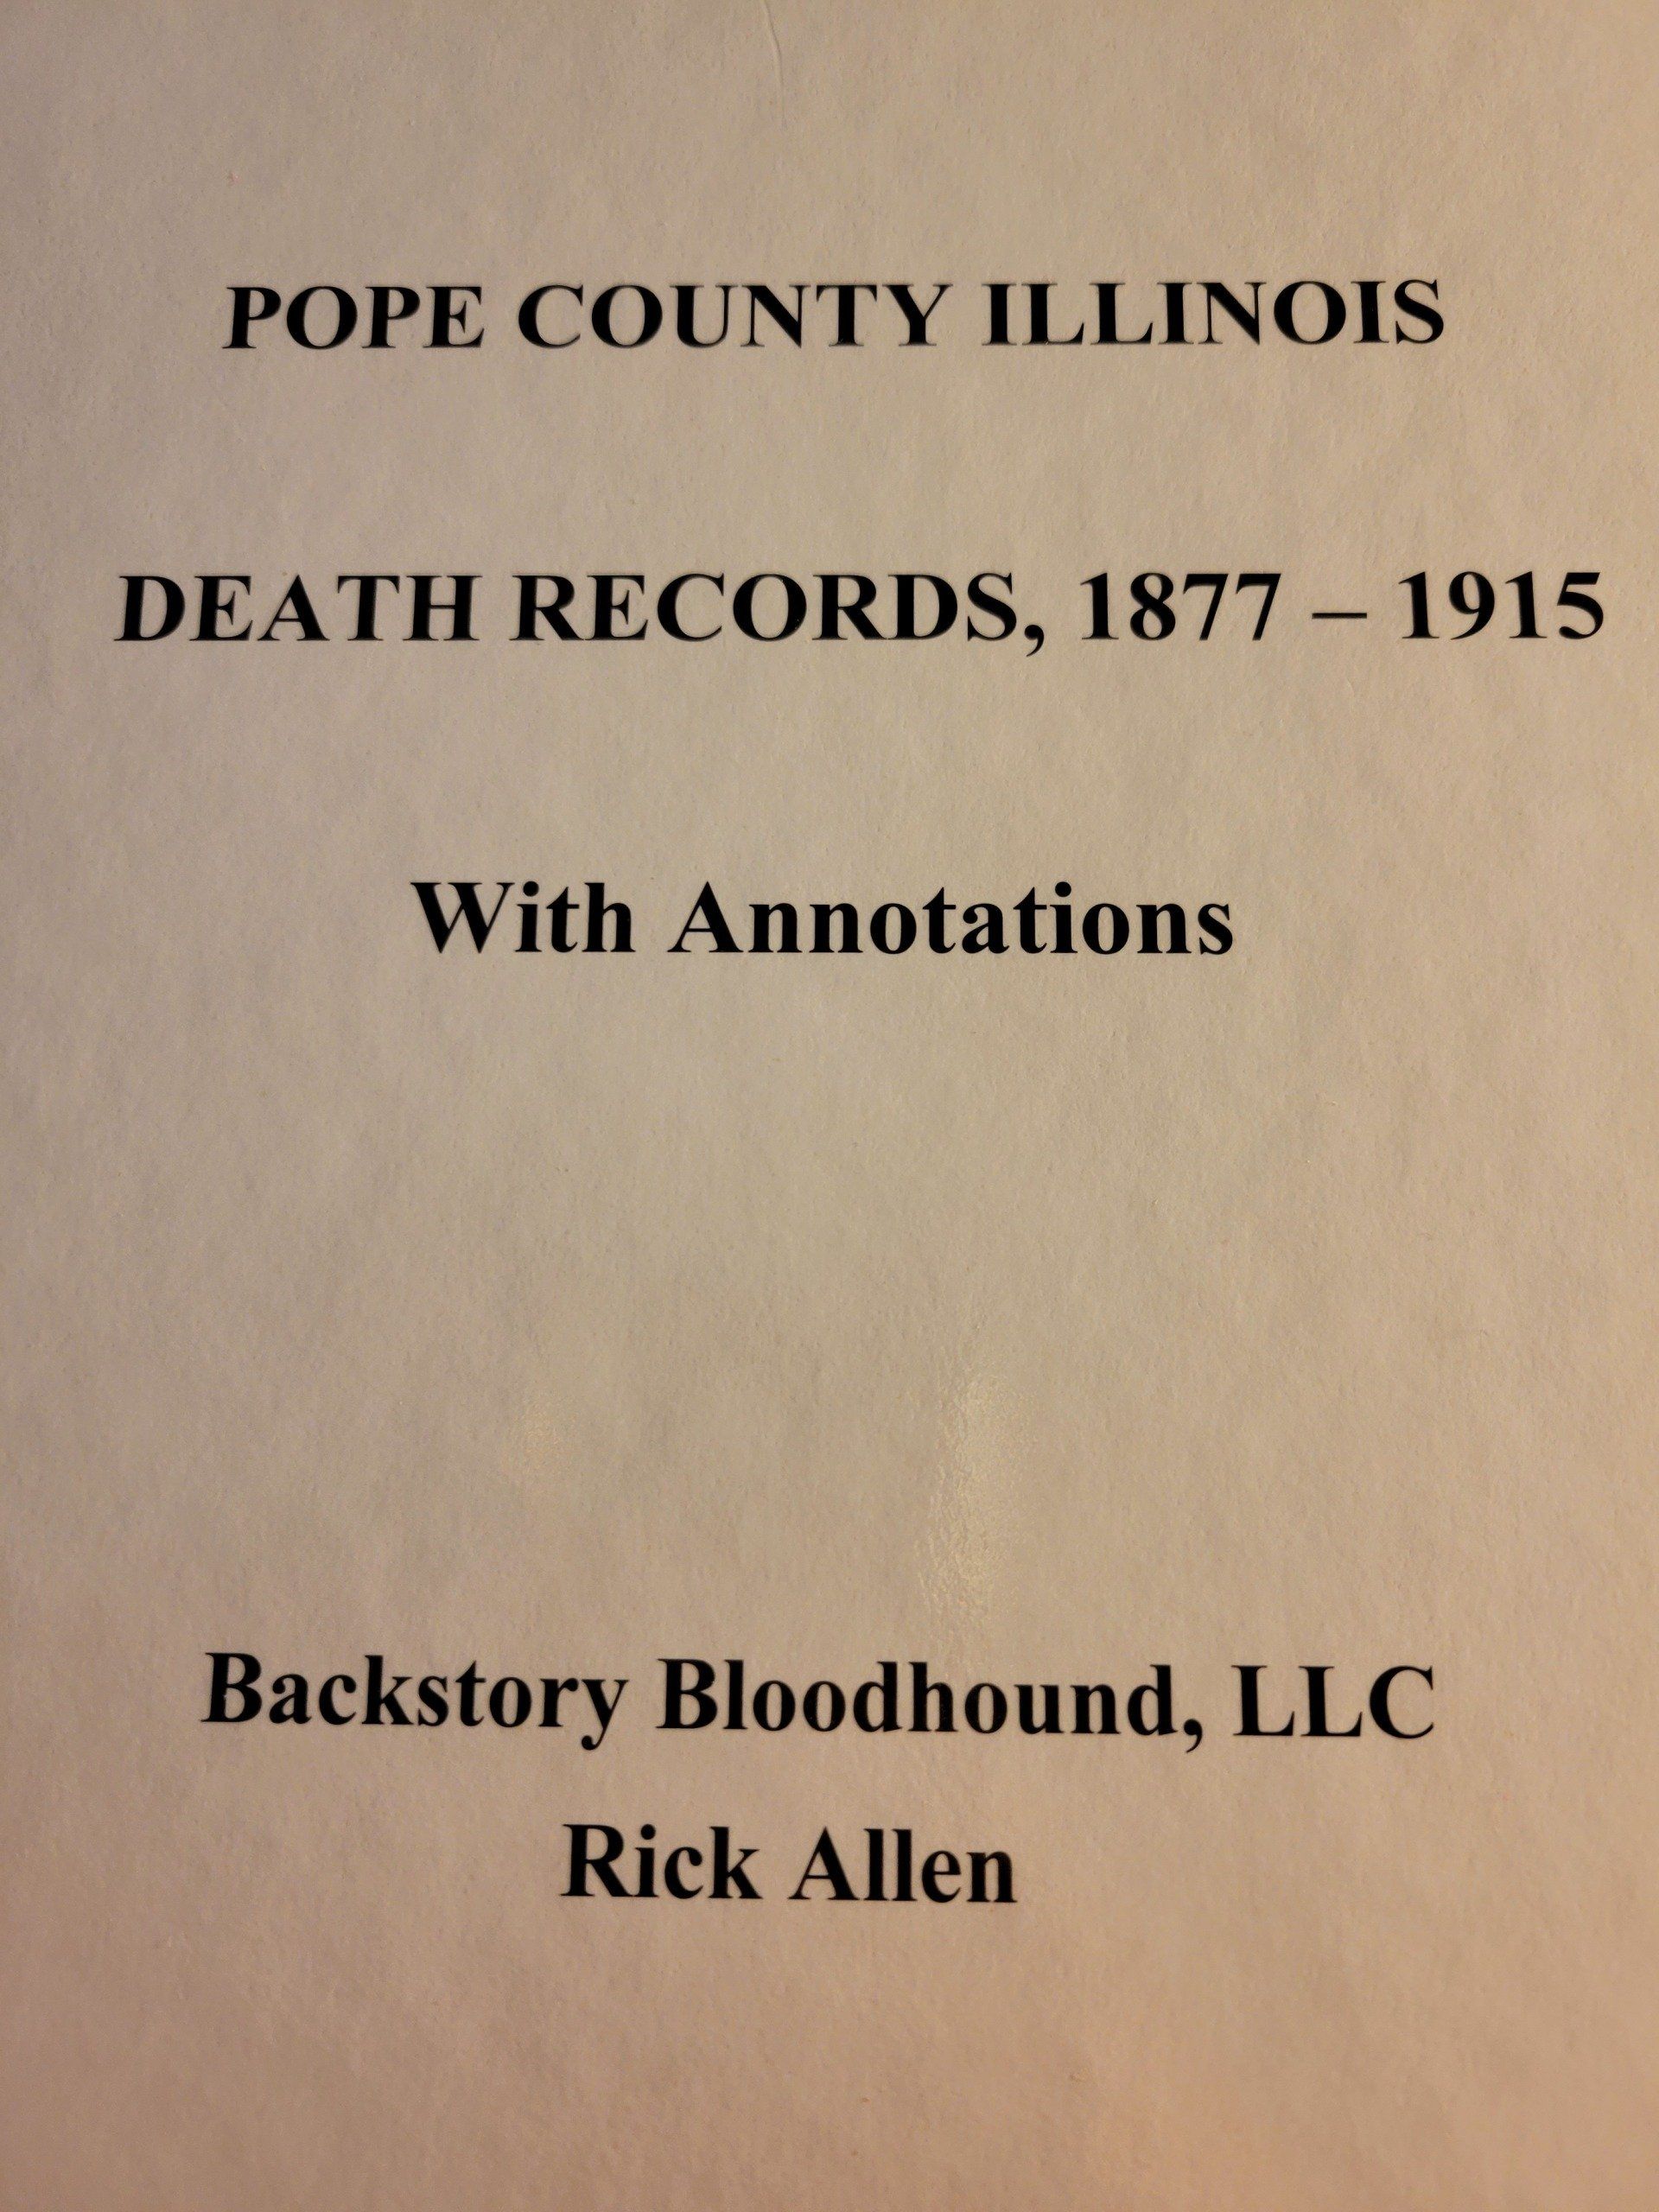 NEW PUBLICATION - POPE COUNTY ILLINOIS DEATH RECORDS, 1877 - 1915 WITH ANNOTATIONS